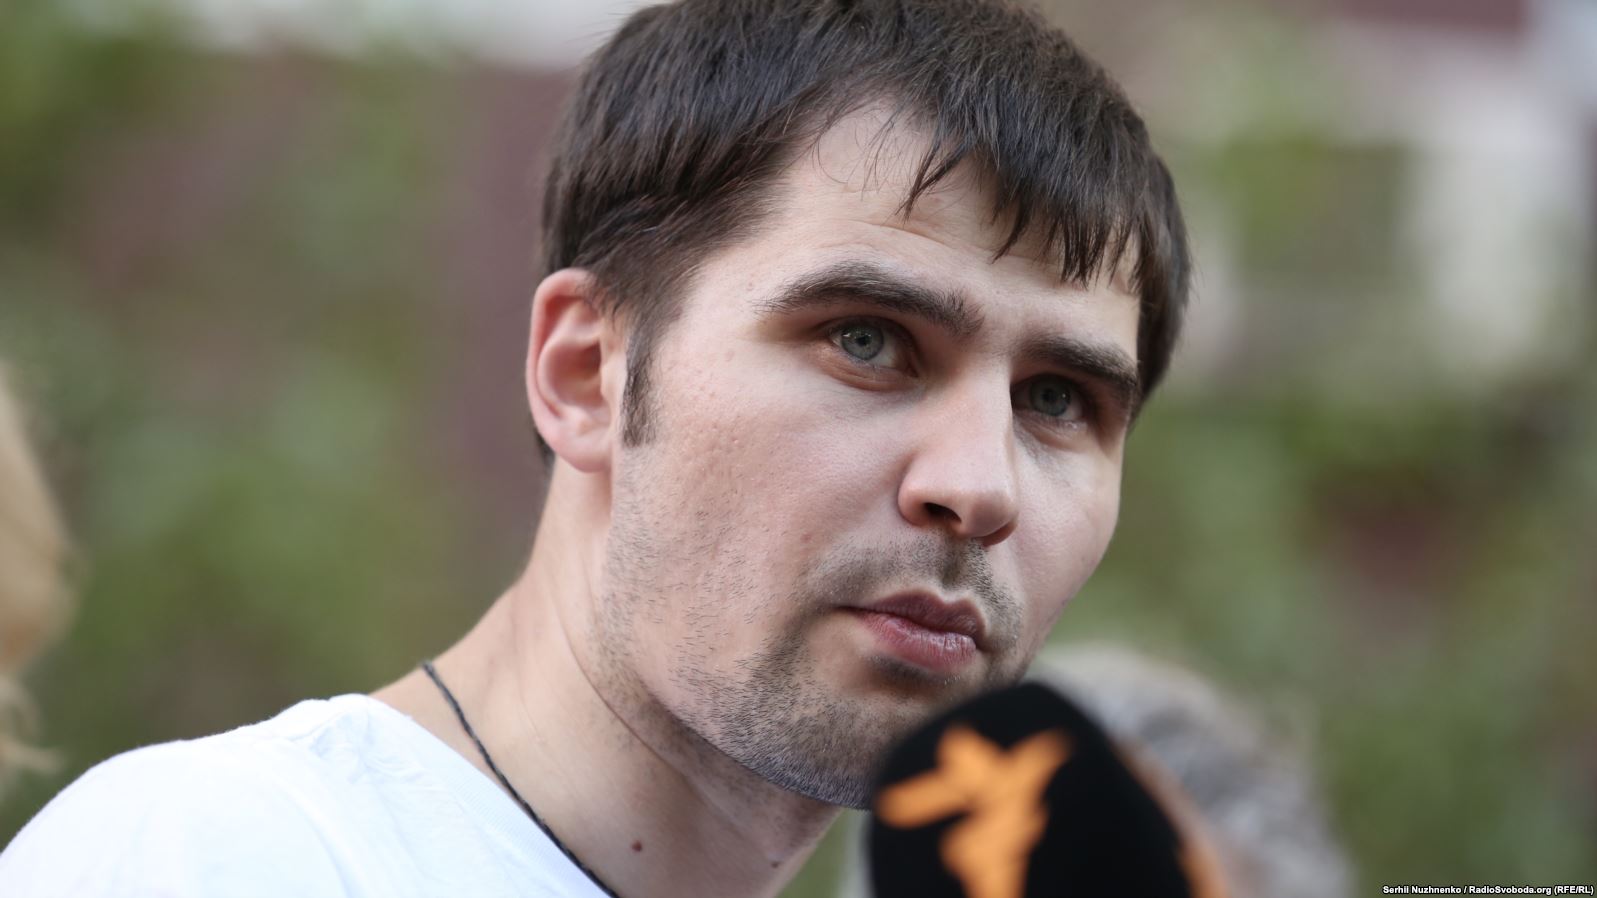 Former Ukrainian hostage Kostenko tells of FSB’s torture to extract “confessions” ~~